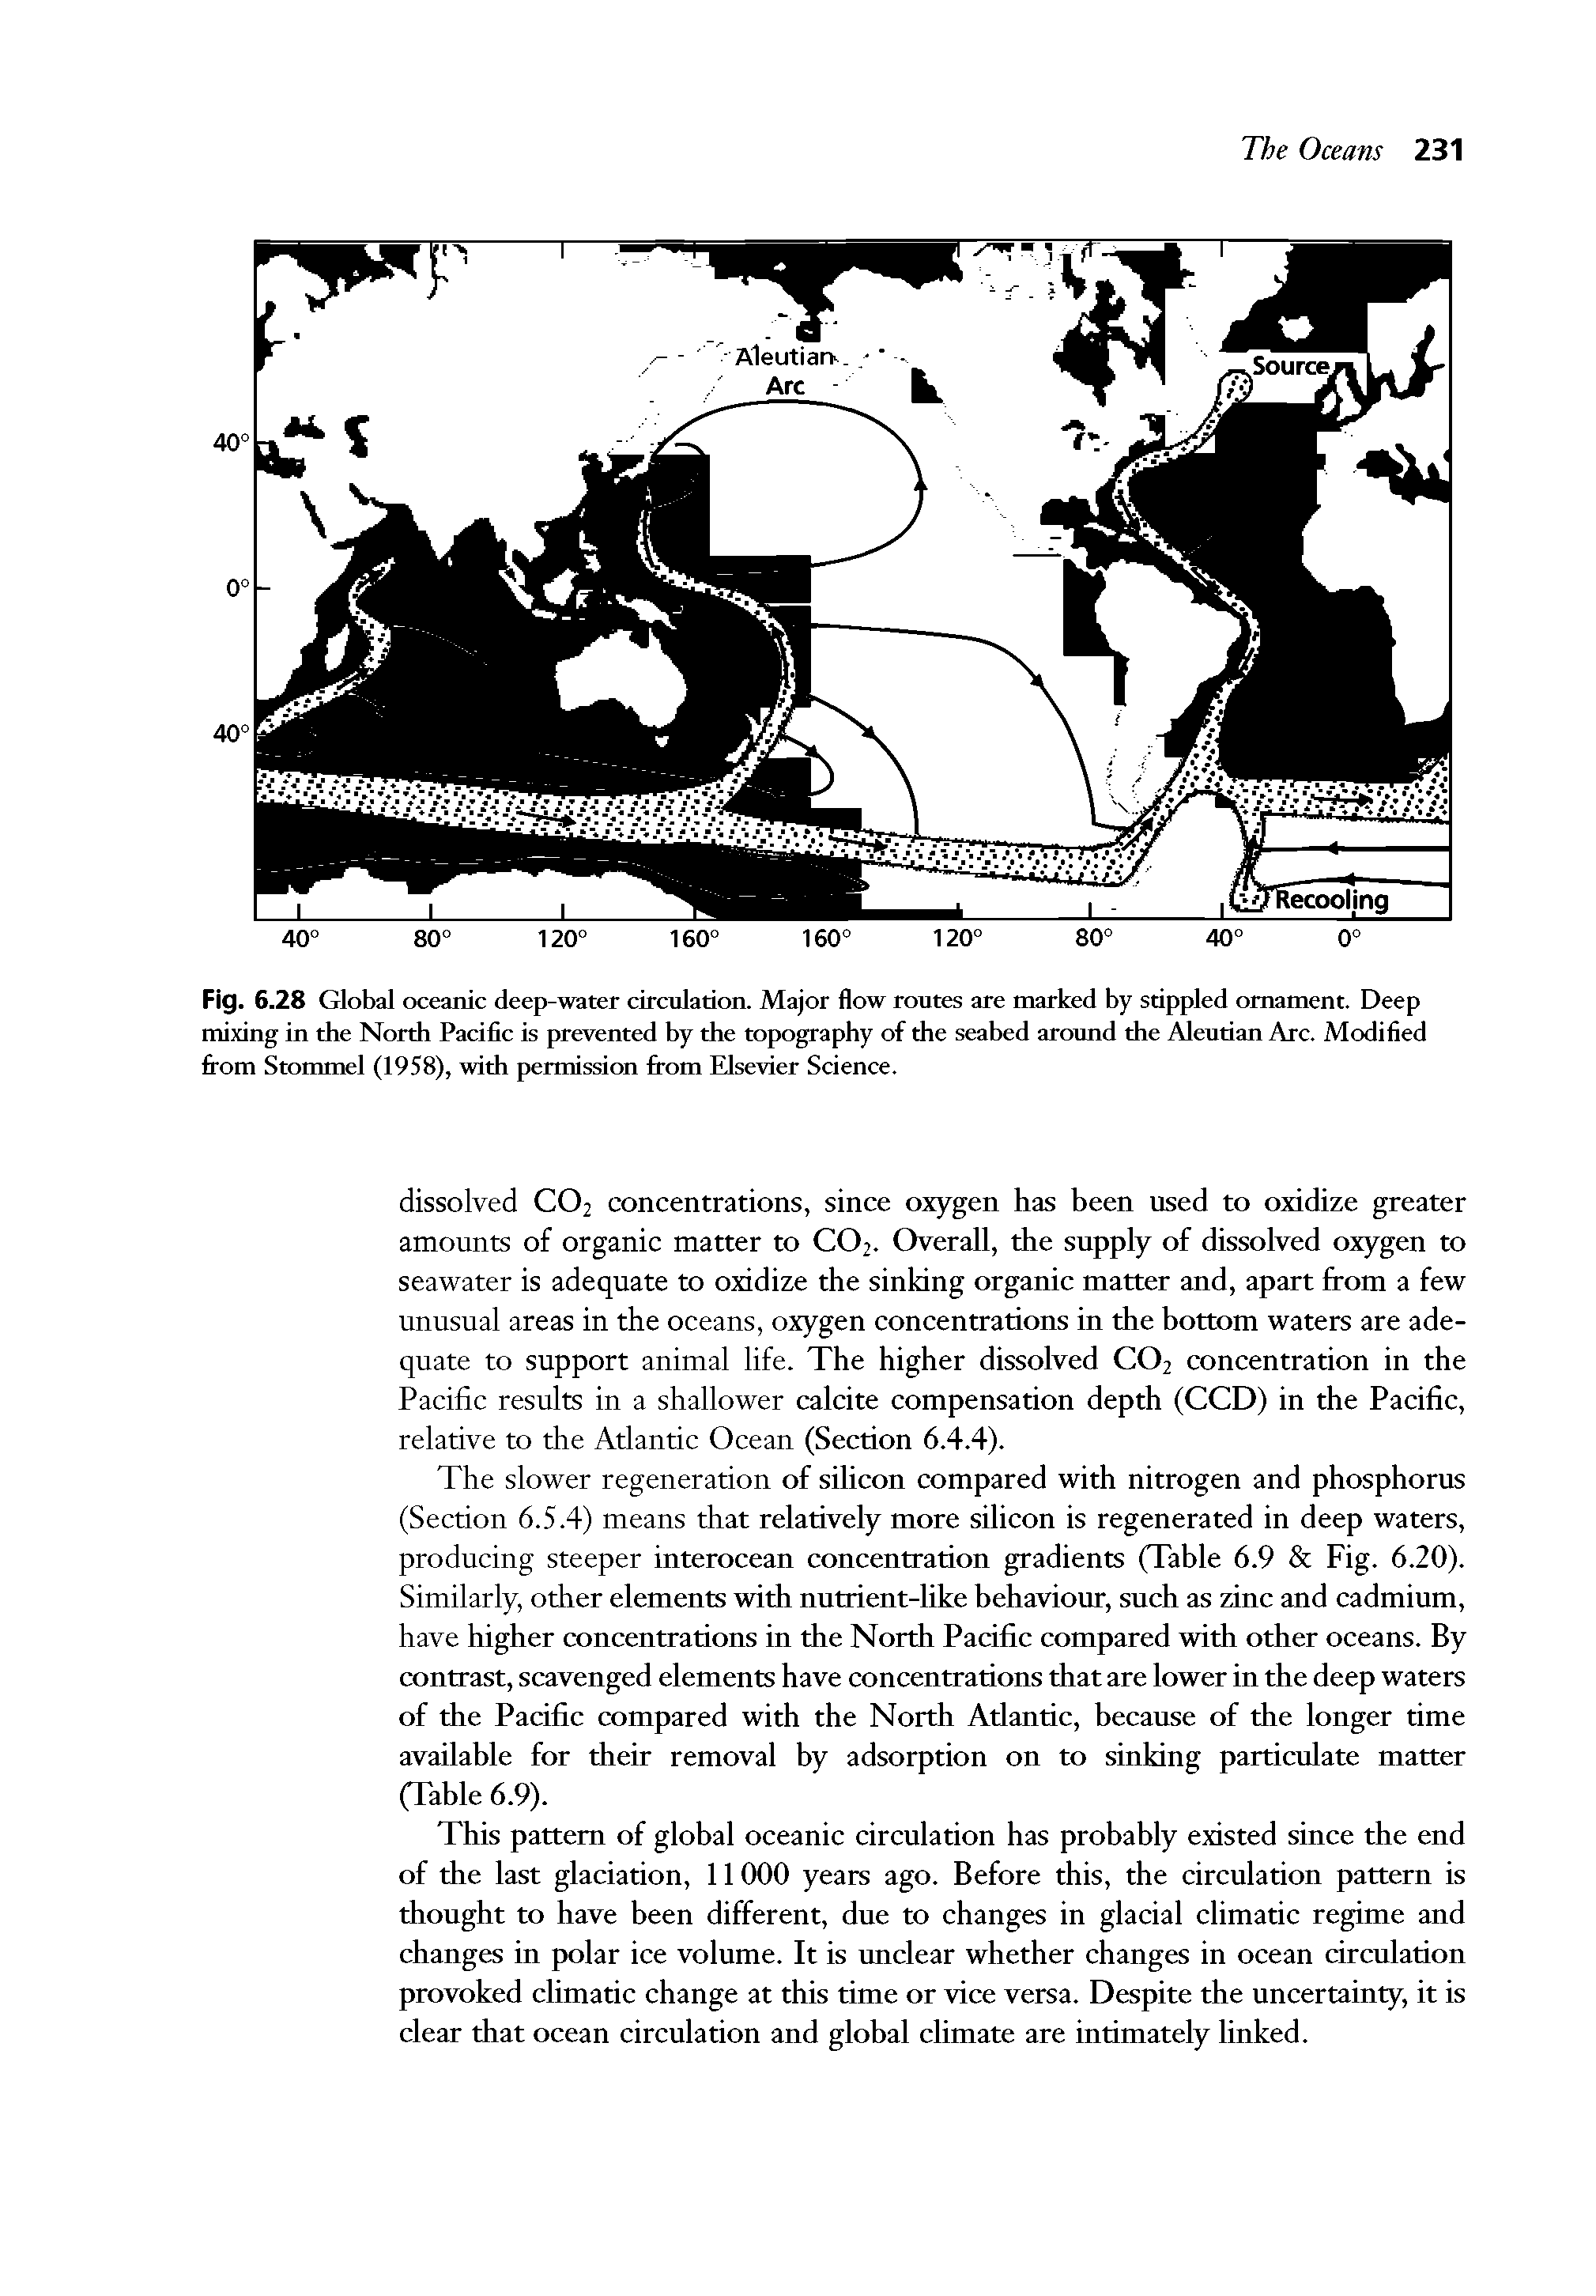 Fig. 6.28 Global oceanic deep-water circulation. Major flow routes are marked by stippled ornament. Deep mixing in the North Pacific is prevented by the topography of the seabed around the Aleutian Arc. Modified from Stommel (1958), with permission from Elsevier Science.